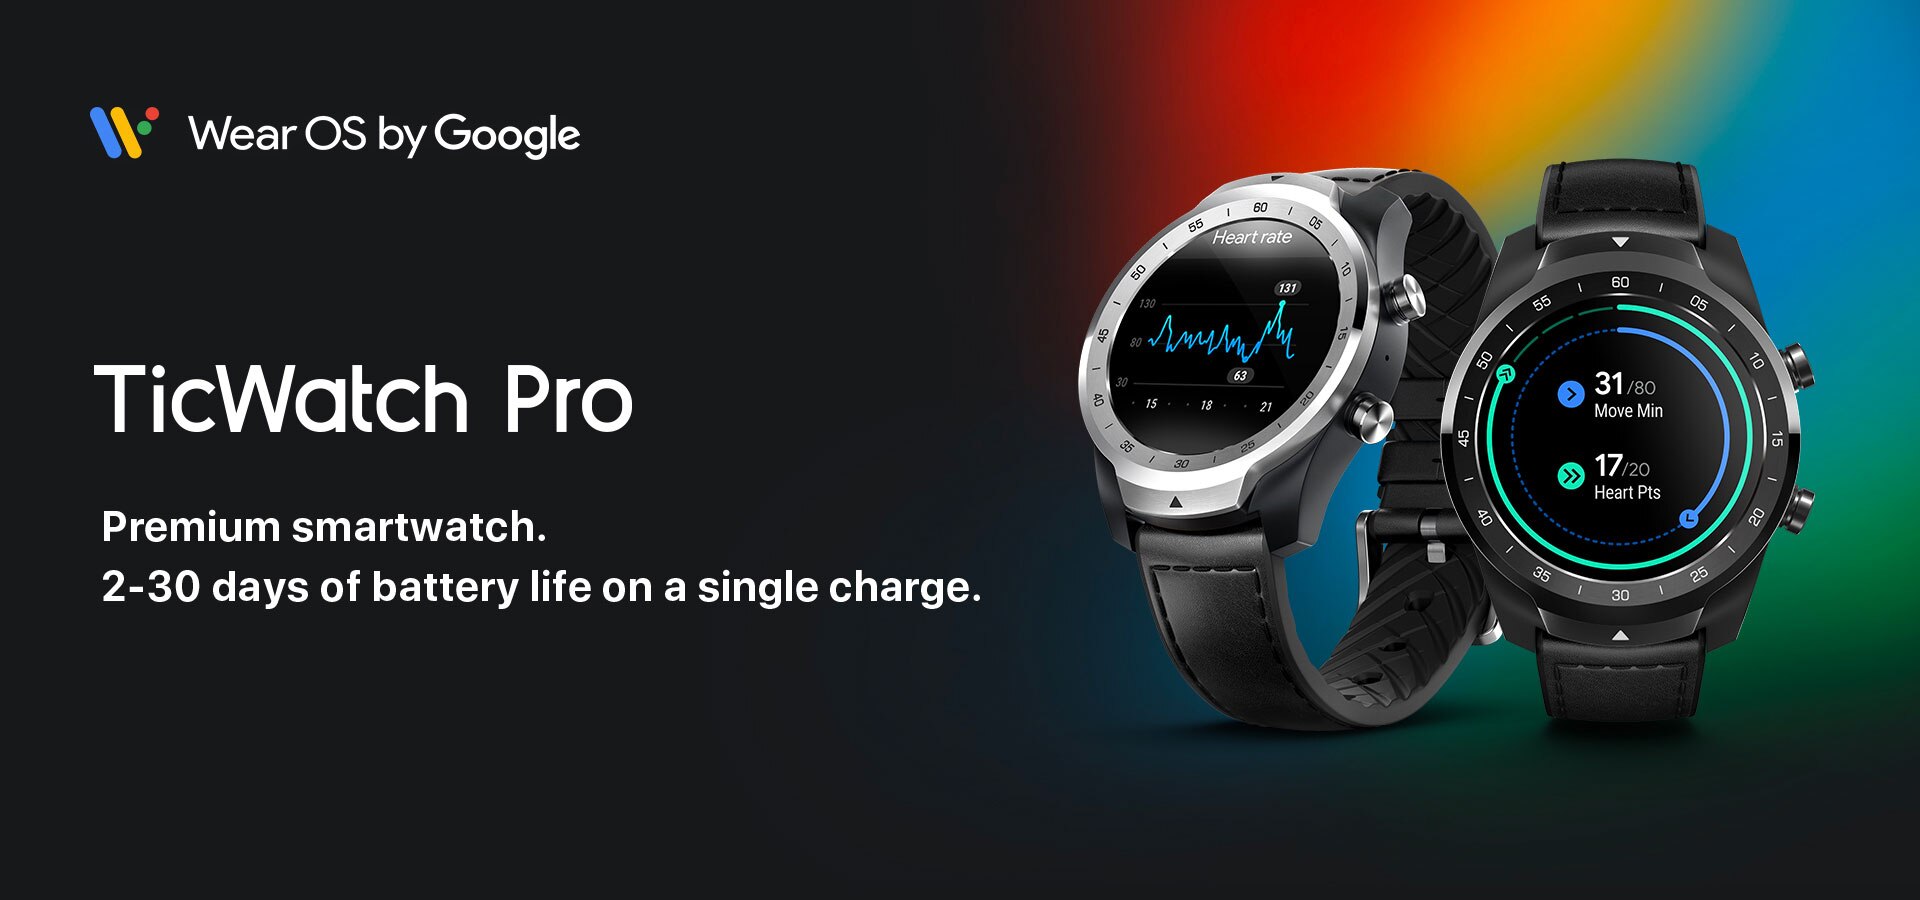 TicWatch Pro Smart Watch Men's Watch Wear OS by Google for iOS& Android NFC Payment Built in GPS Waterproof Bluetooth Smartwatch